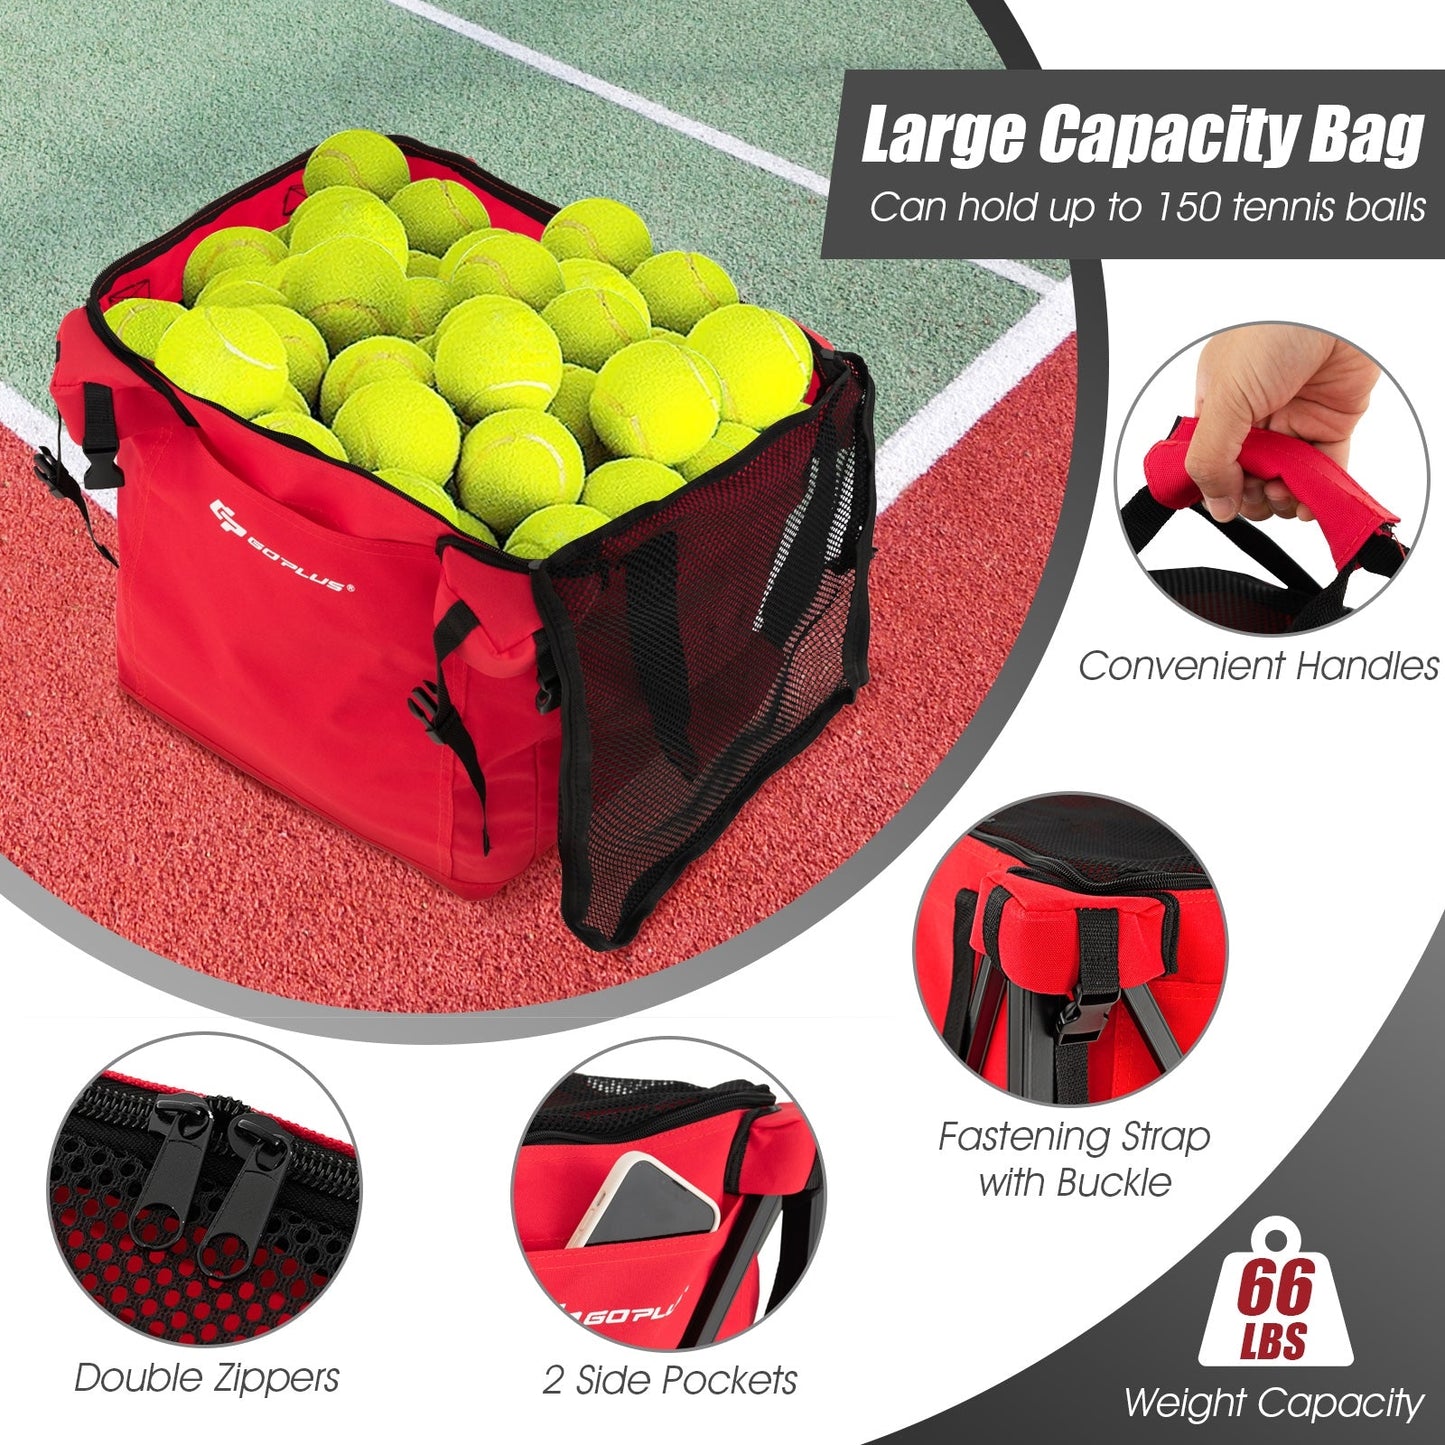 Lightweight Foldable Tennis Ball Teaching Cart with Wheels and Removable Bag - Gallery Canada